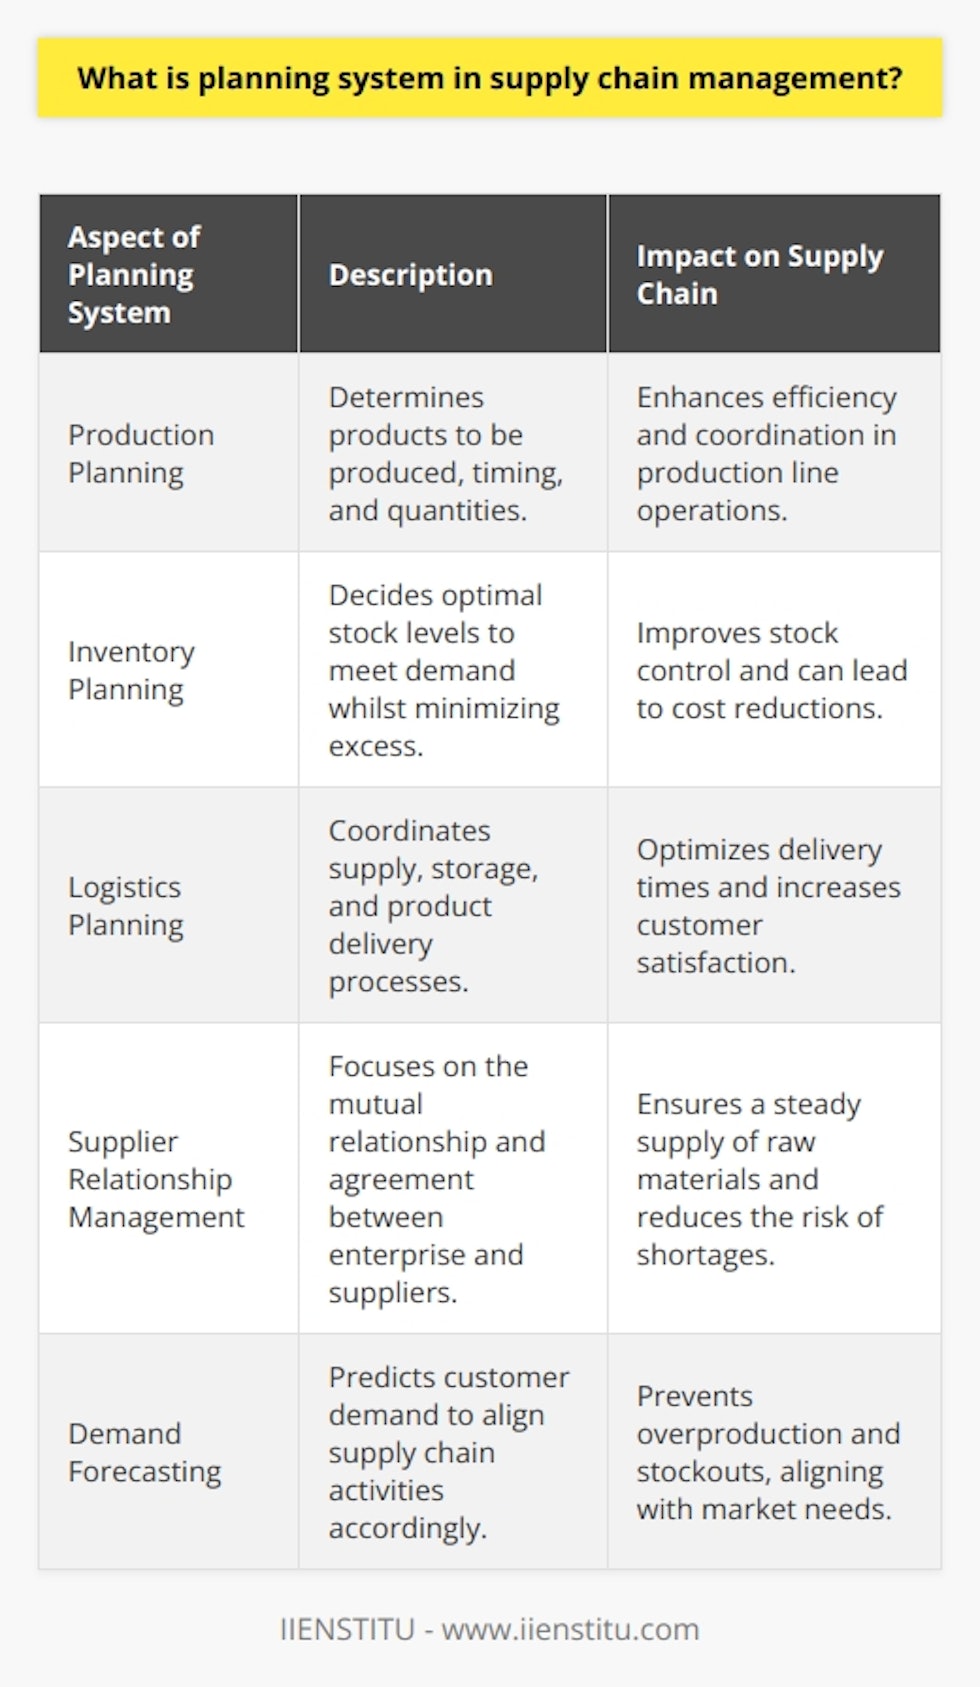 The Planning System in Supply Chain ManagementDefinition of Planning SystemIn supply chain management, the planning system refers to the method of predetermining and organizing activities related to the procurement process of a business. With such a system, businesses can manage their supply and production processes more efficiently and effectively.Importance of the Planning SystemThe planning system plays a critical role at every step of the supply chain. A good planning strategy enables enterprises to achieve success in acquiring necessary resources, optimizing order and production processes, and regulating relationships with suppliers.Different Types of PlanningSupply chain management encompasses several types of planning, such as production planning, inventory planning, and logistics planning.Production PlanningProduction planning is a strategic process that determines which products will be produced, when, and in what quantities. Proper production planning facilitates efficient operations along the production line and allows for the smooth execution of supply and production processes.Inventory PlanningInventory planning helps determine the levels of stock in warehouses to meet current and future needs. Effective inventory planning ensures stock control and offers businesses the opportunity to reduce costs.Logistics PlanningLogistics planning involves the coordination of the processes of supplying, storing, and delivering products to the consumer. This process is important for optimizing order and delivery times and increasing customer satisfaction.ConclusionIn conclusion, the planning system in supply chain management contributes to the successful execution of an enterprise's production, inventory, and logistics processes. When good planning is in place, not only can businesses realize cost savings, but customer satisfaction can also be enhanced.